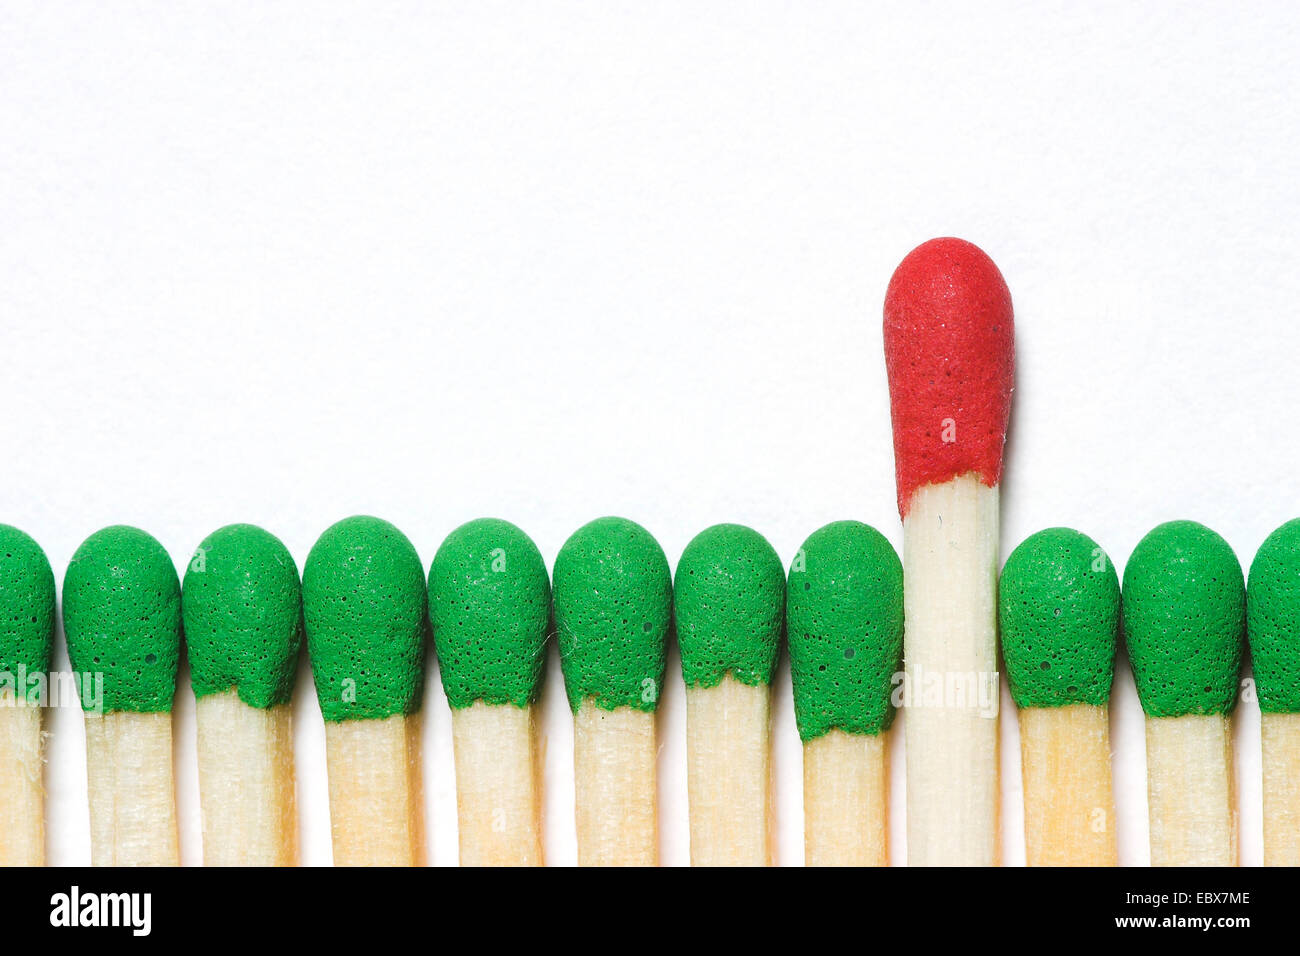 one big red matchstick amongst green ones Stock Photo